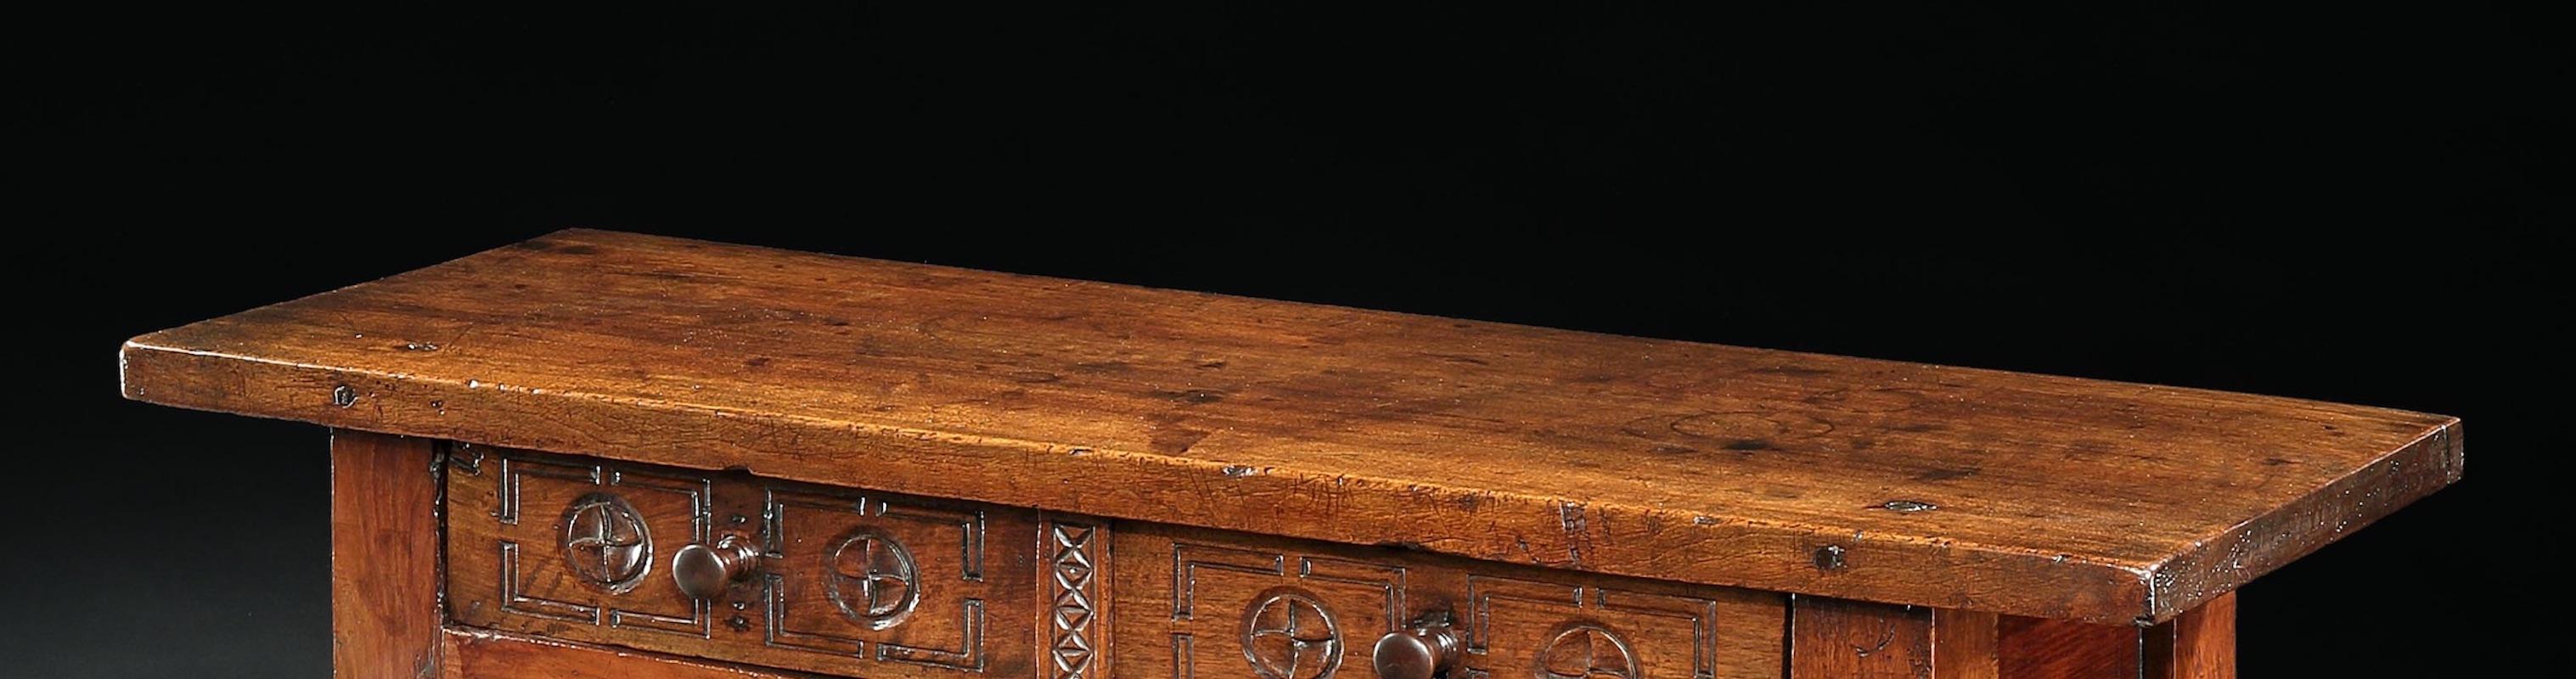 Joinery Table, Side Table, Console, 17th Century, Spanish, Baroque, Walnut, Chip Carving For Sale